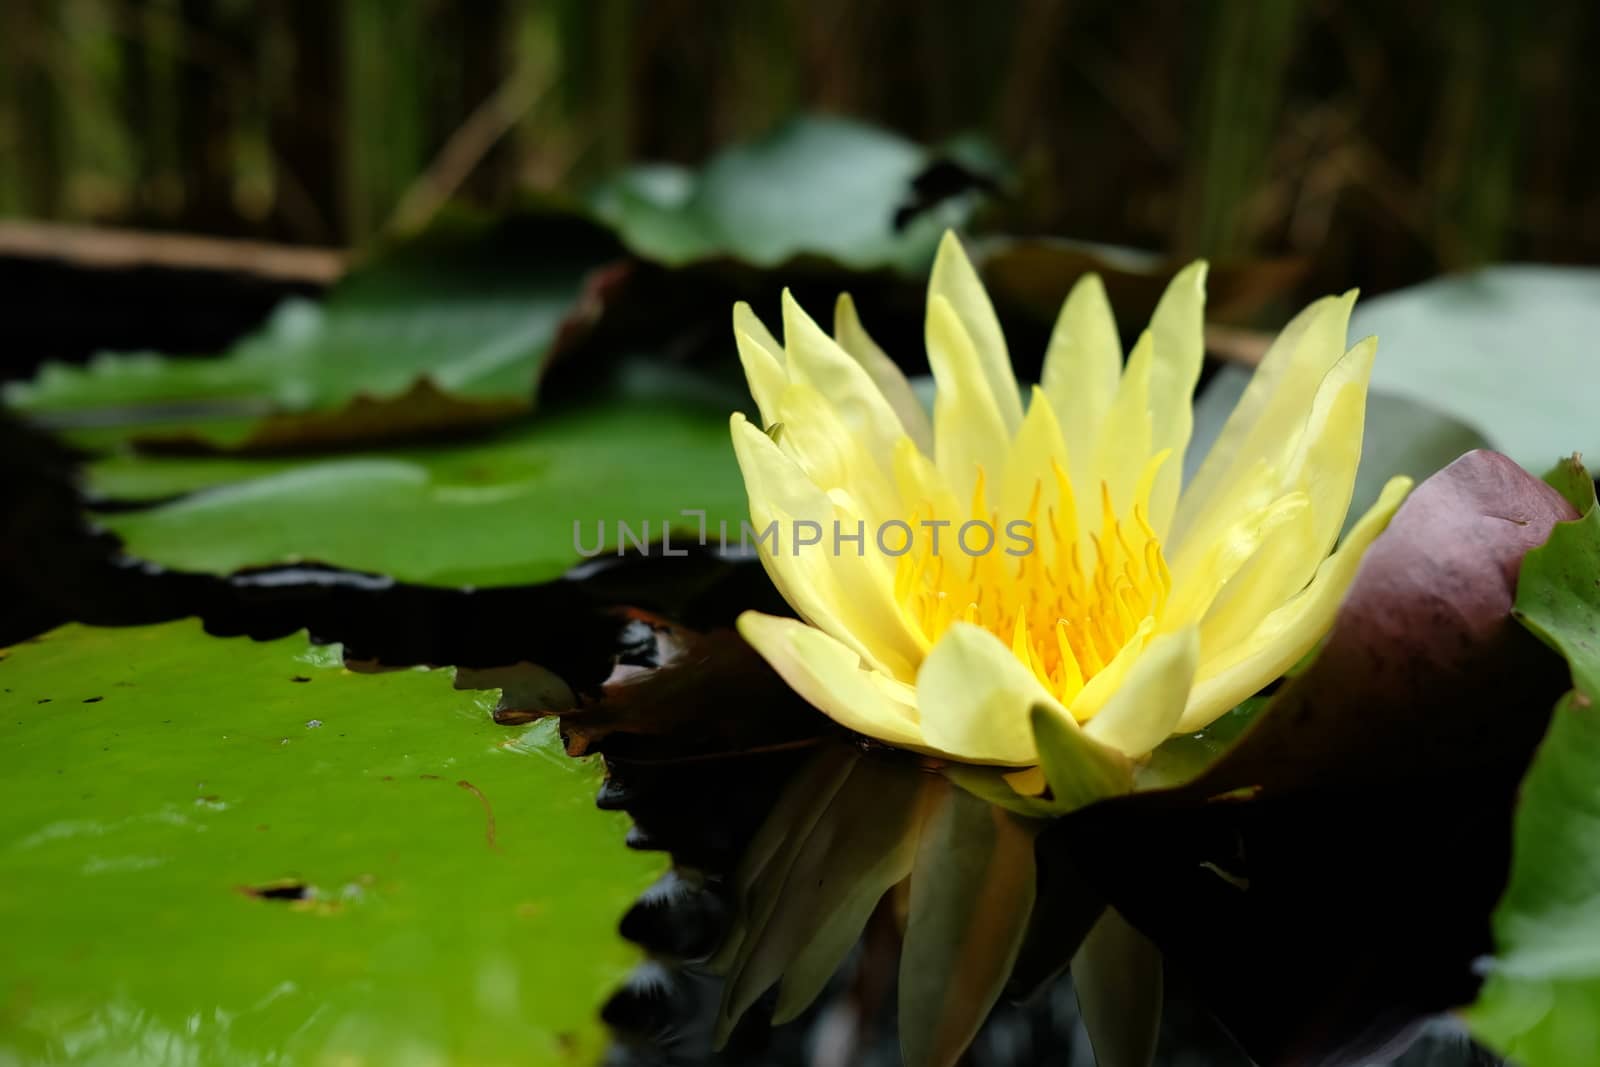 Close-up Yellow Lotus Flower with Reflection on Water Surface in Soft-Focus in The Background. (Selective Focus)